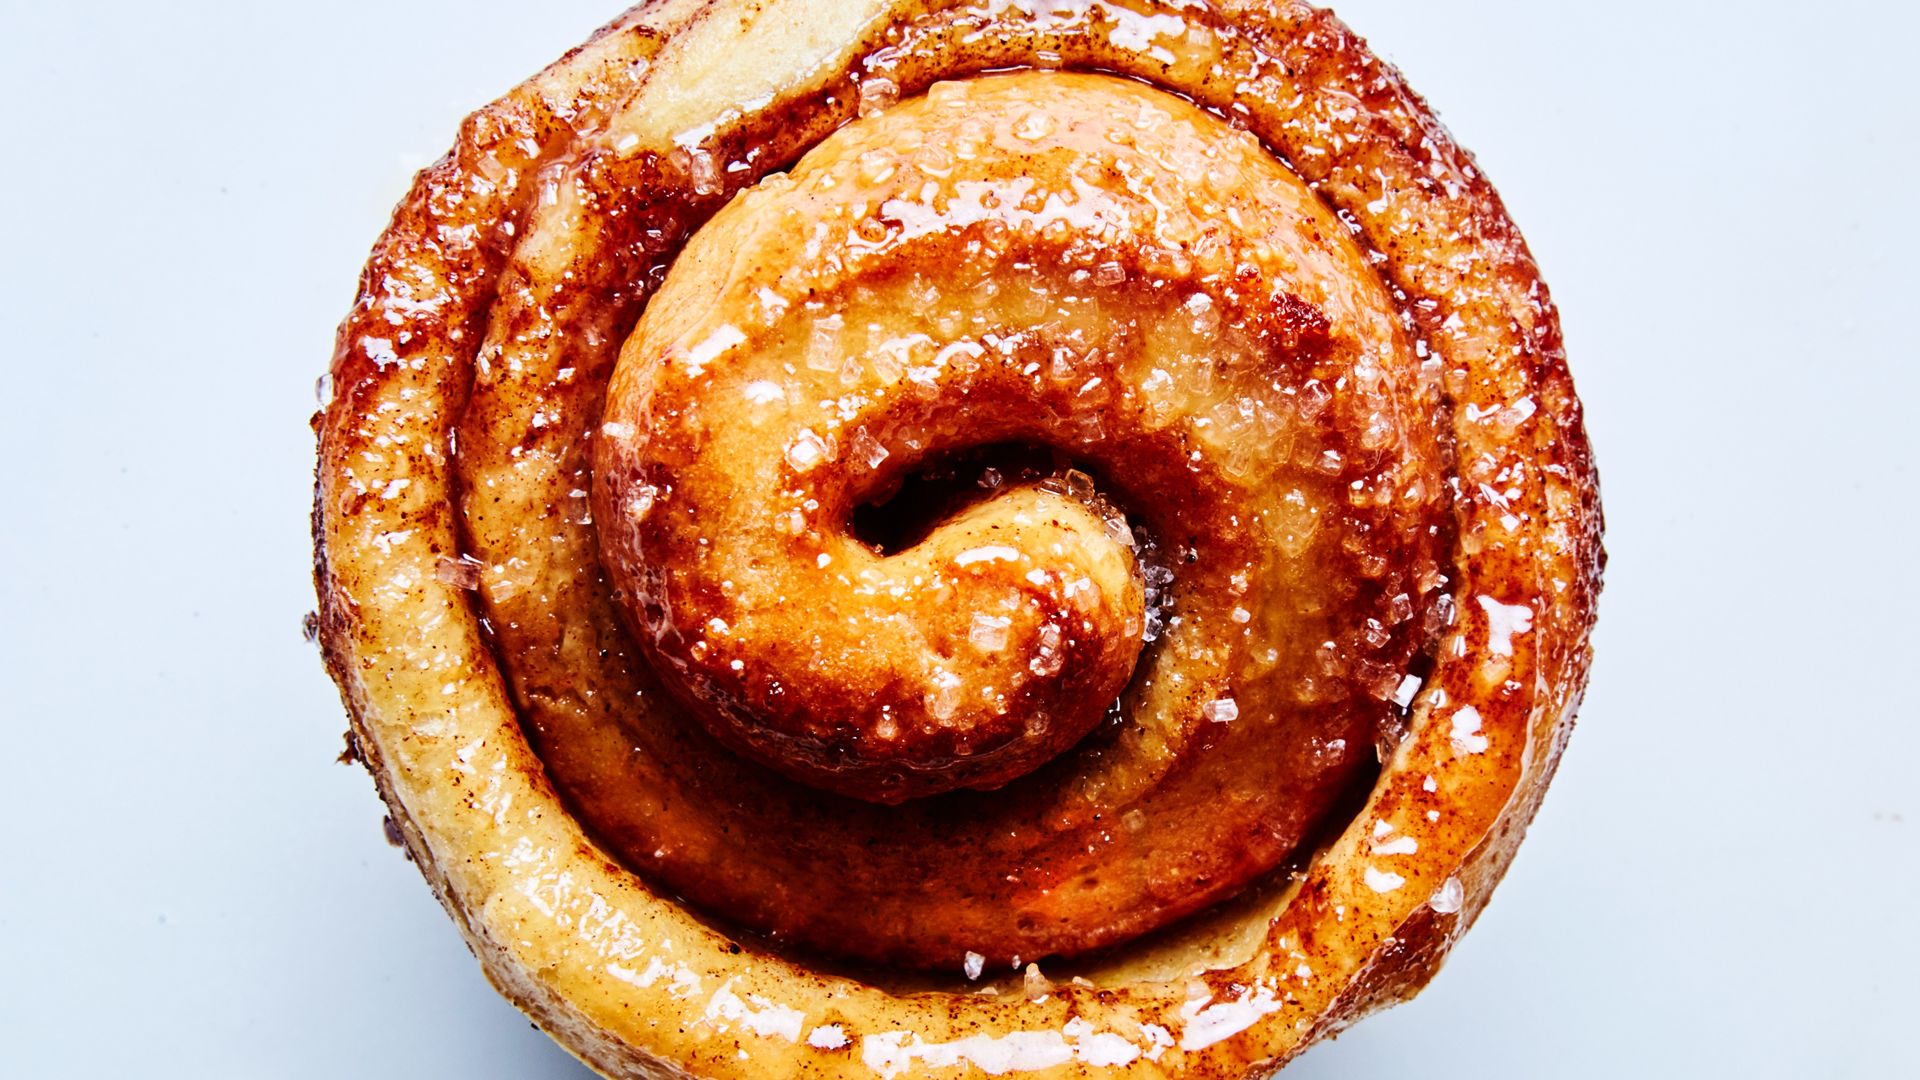 How To Make The Best Morning Buns